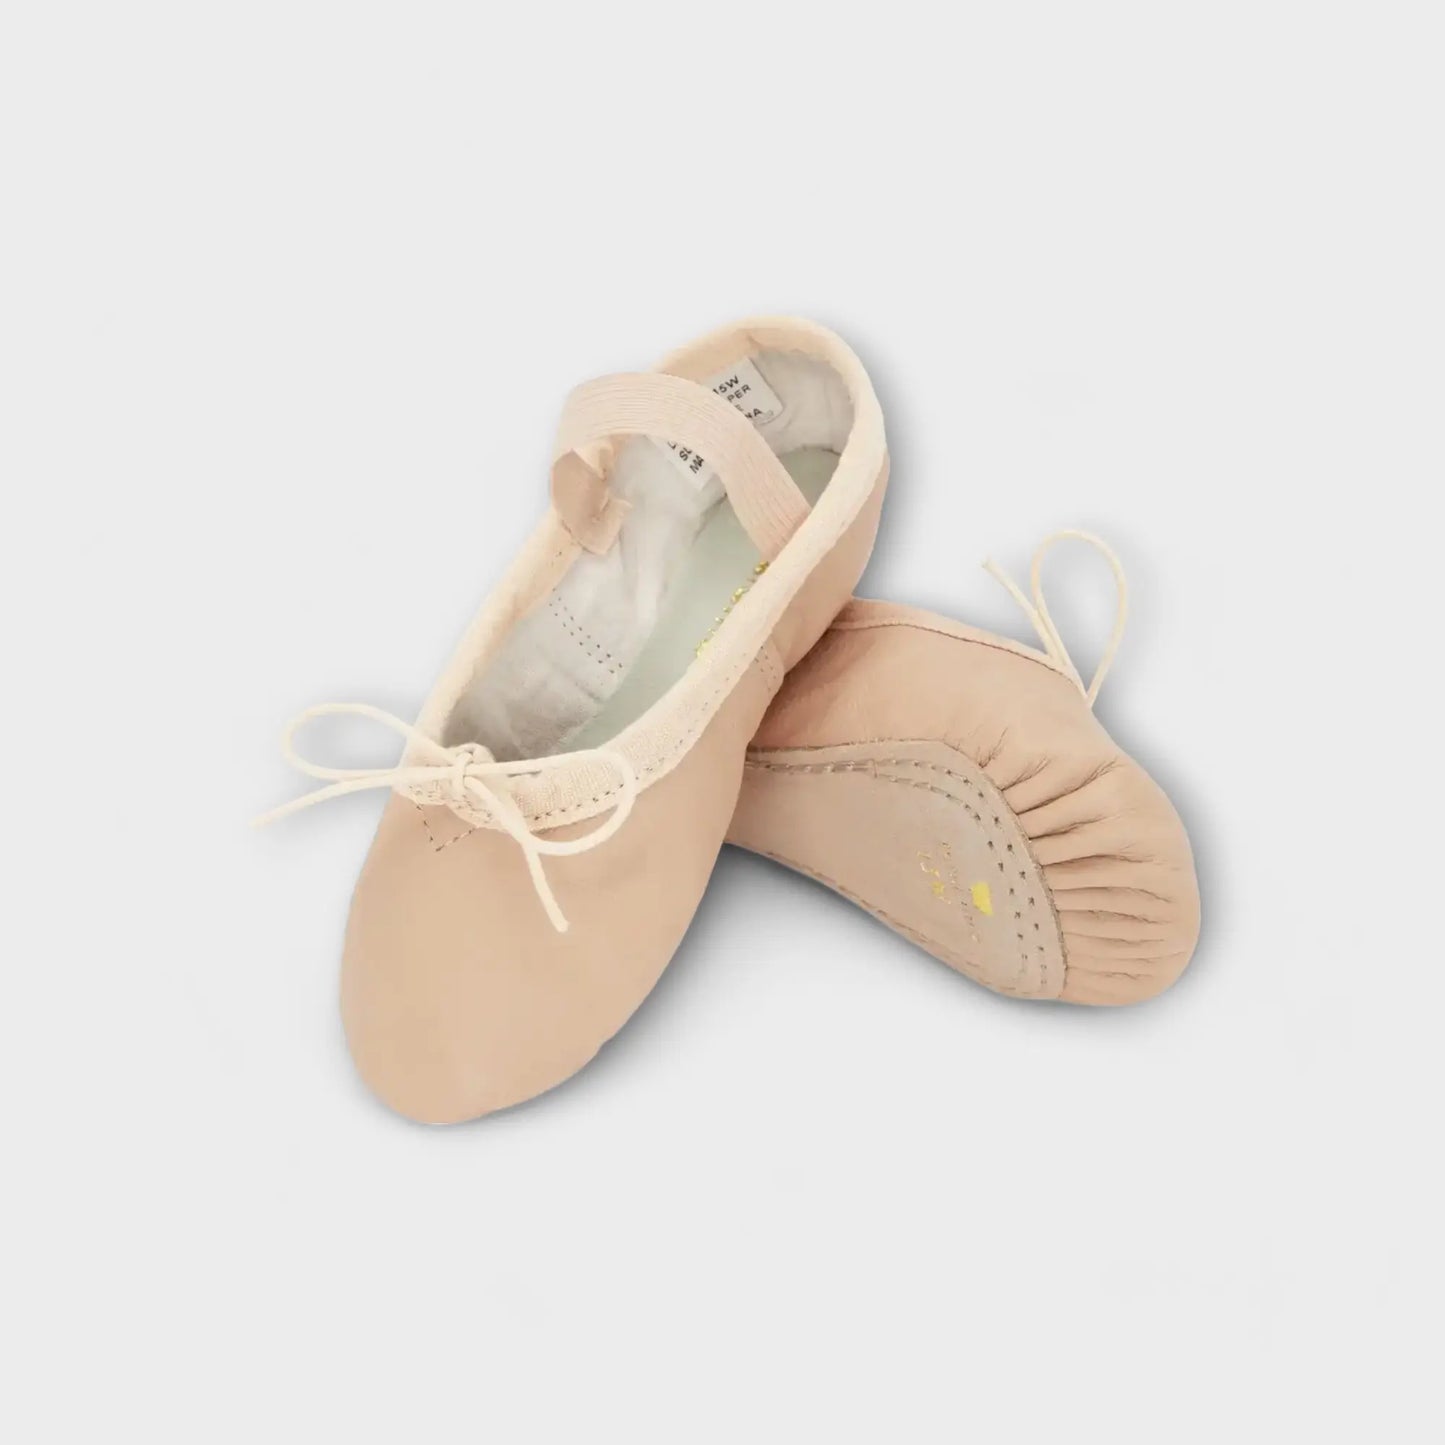 Tutulamb Kids Leather Professional Classic Ballet Shoes